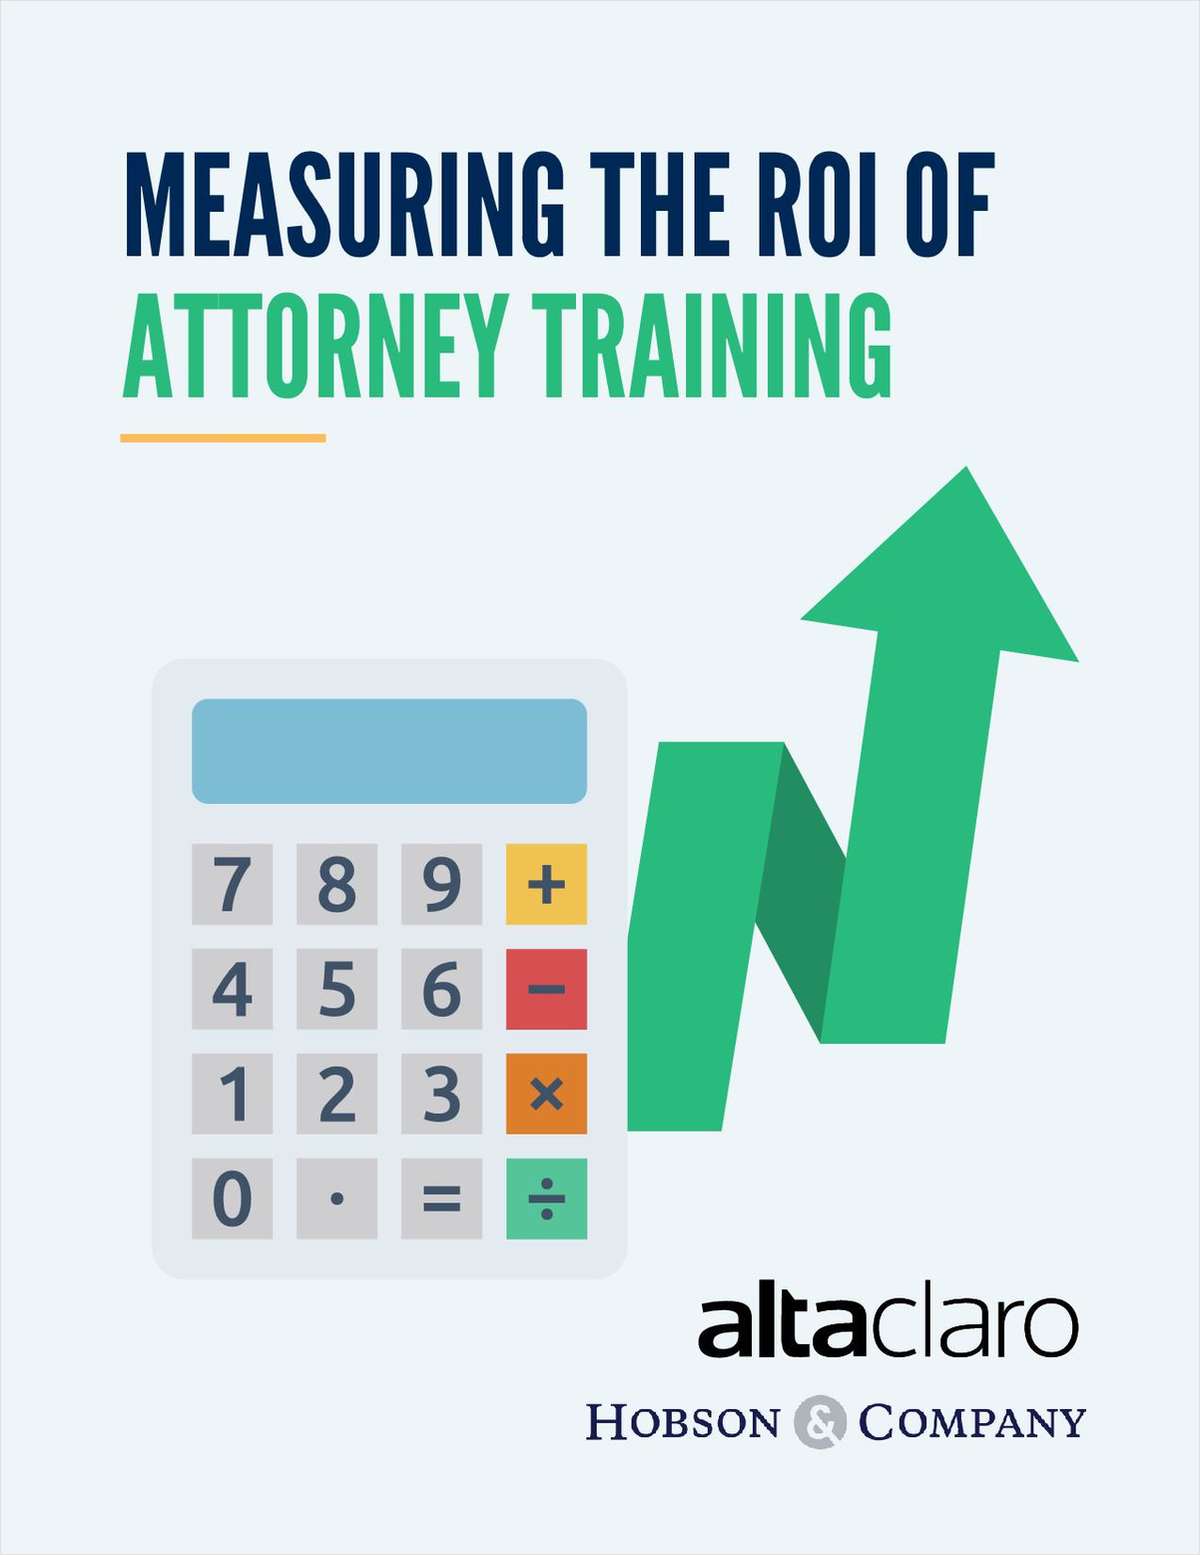 How much does your firm spend on training new attorneys out of law school? Download this report and learn how an attorney training program can reduce the cost and effort of training new hires, while generating an ROI of up to 280-430% in less than 3 months.